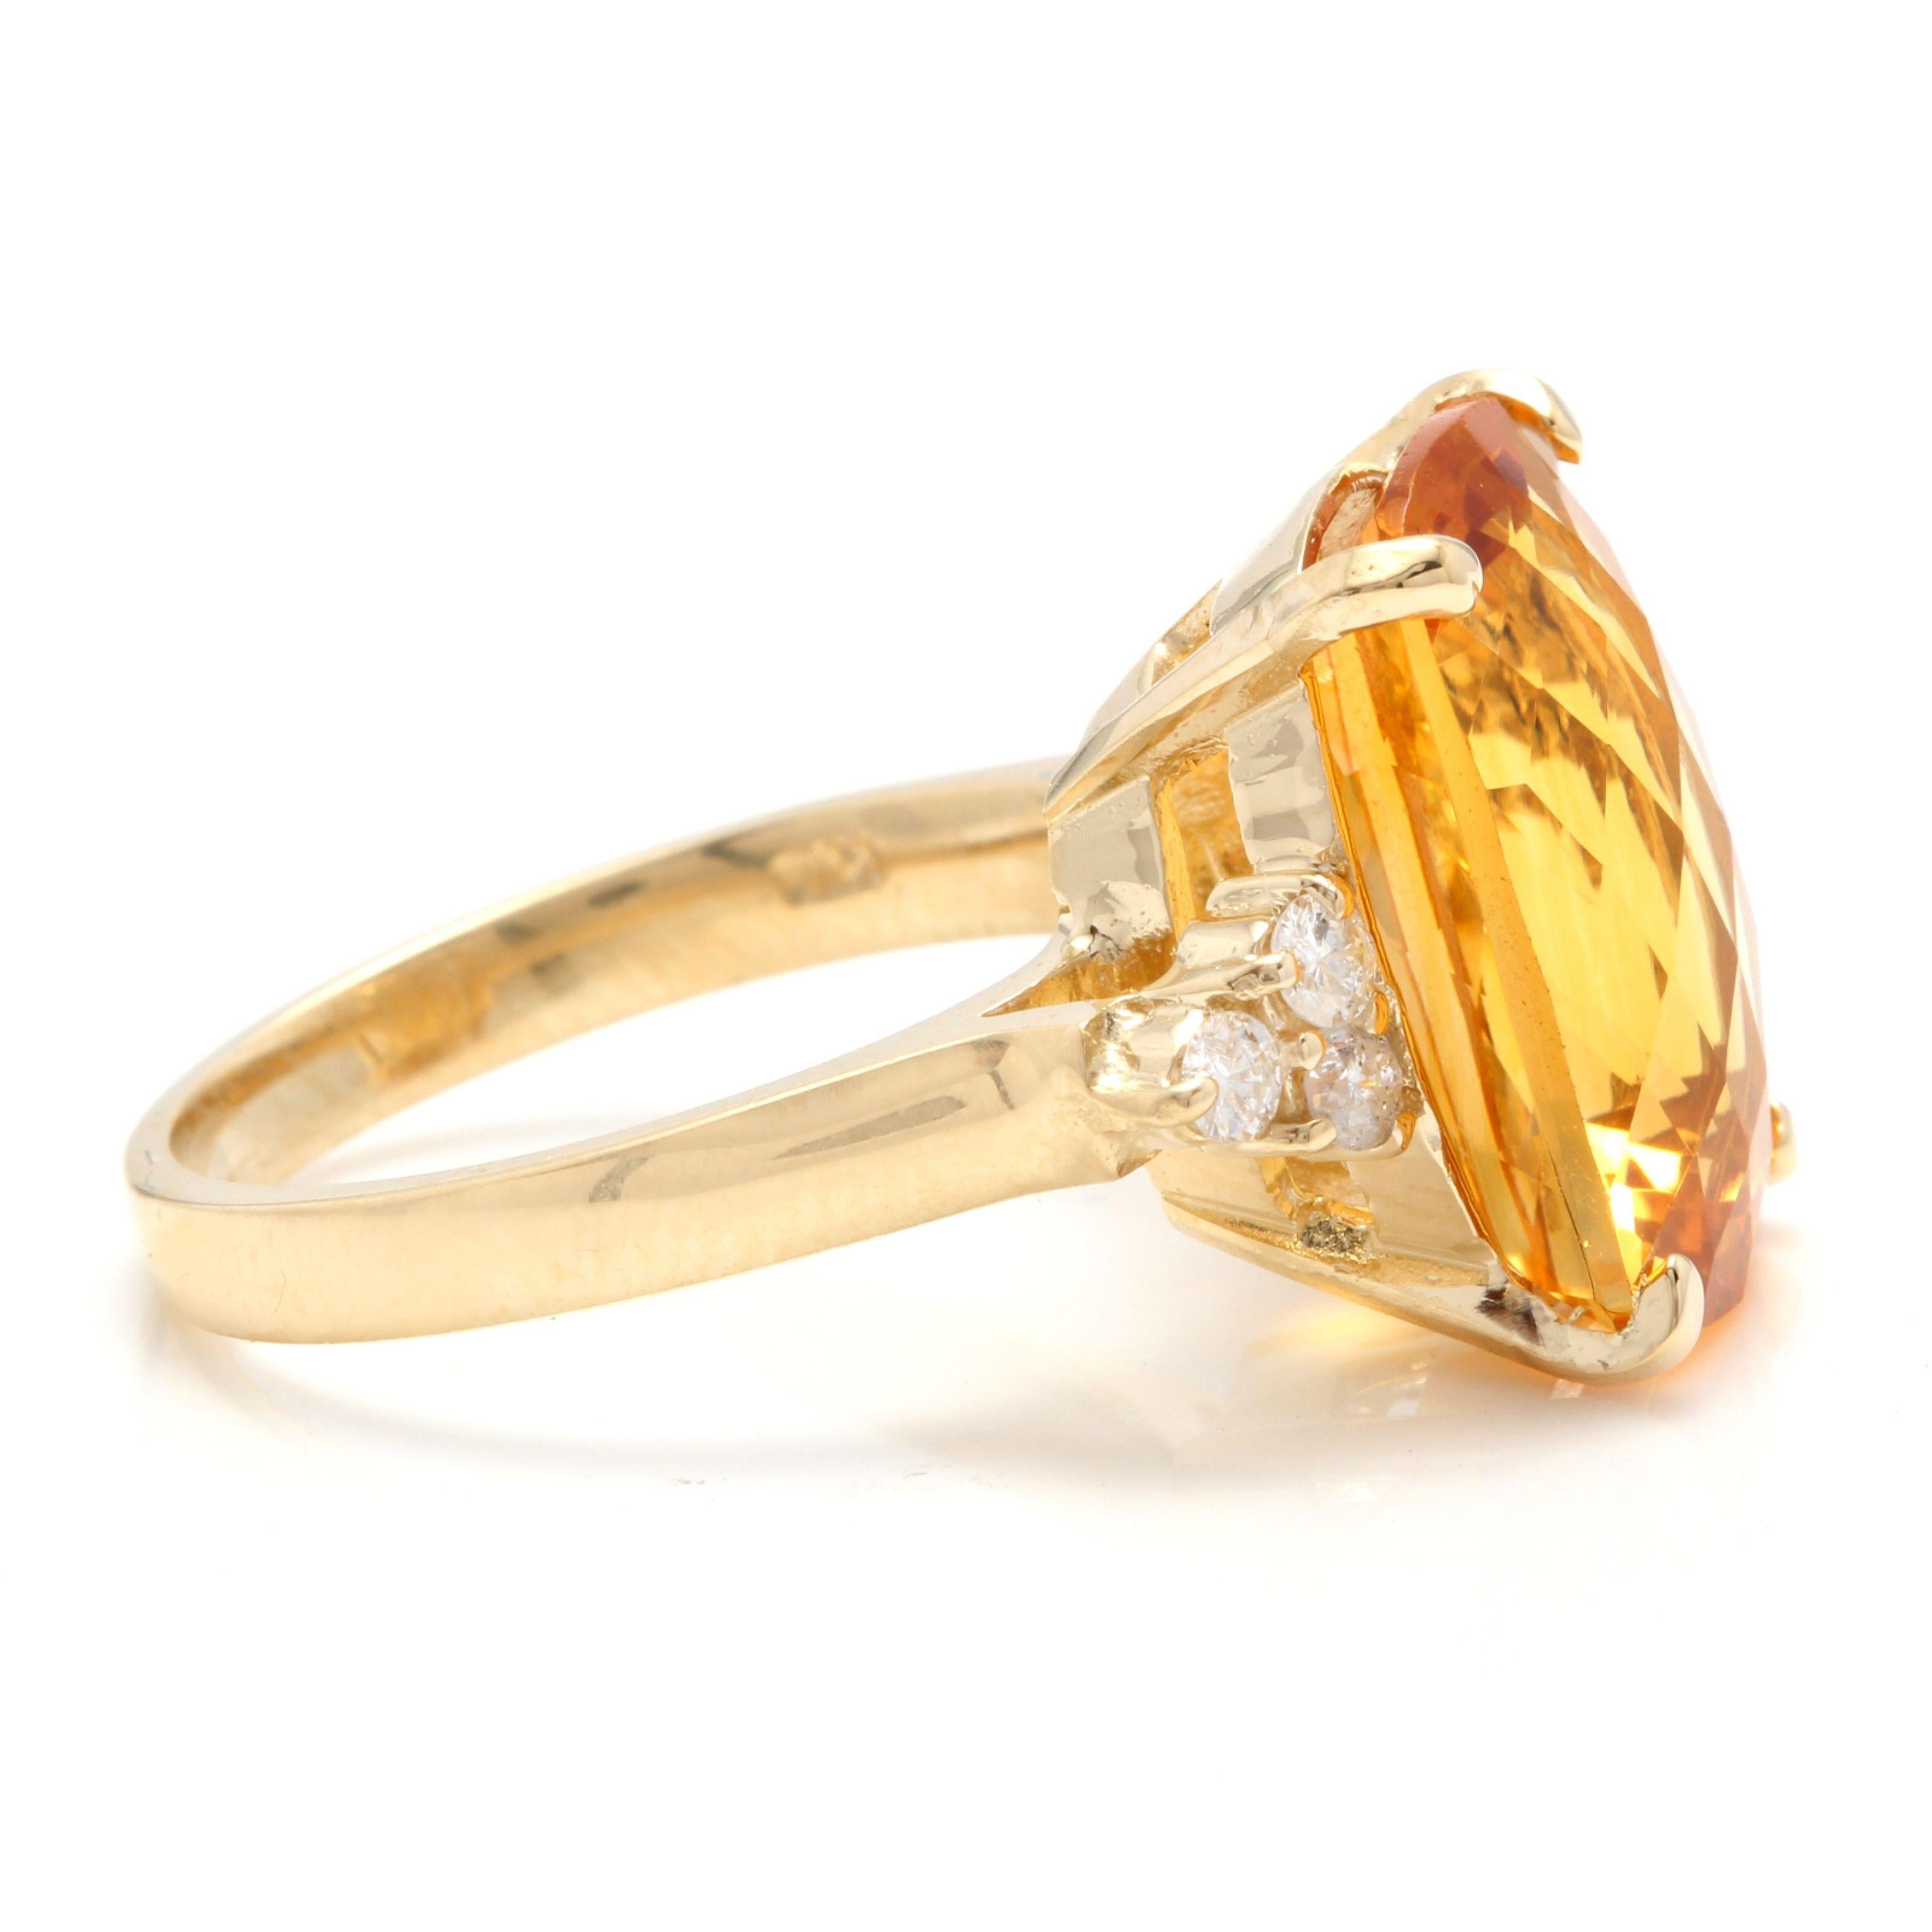 Mixed Cut 9.35 Ct Natural Very Nice Looking Citrine and Diamond 14K Solid Yellow Gold Ring For Sale